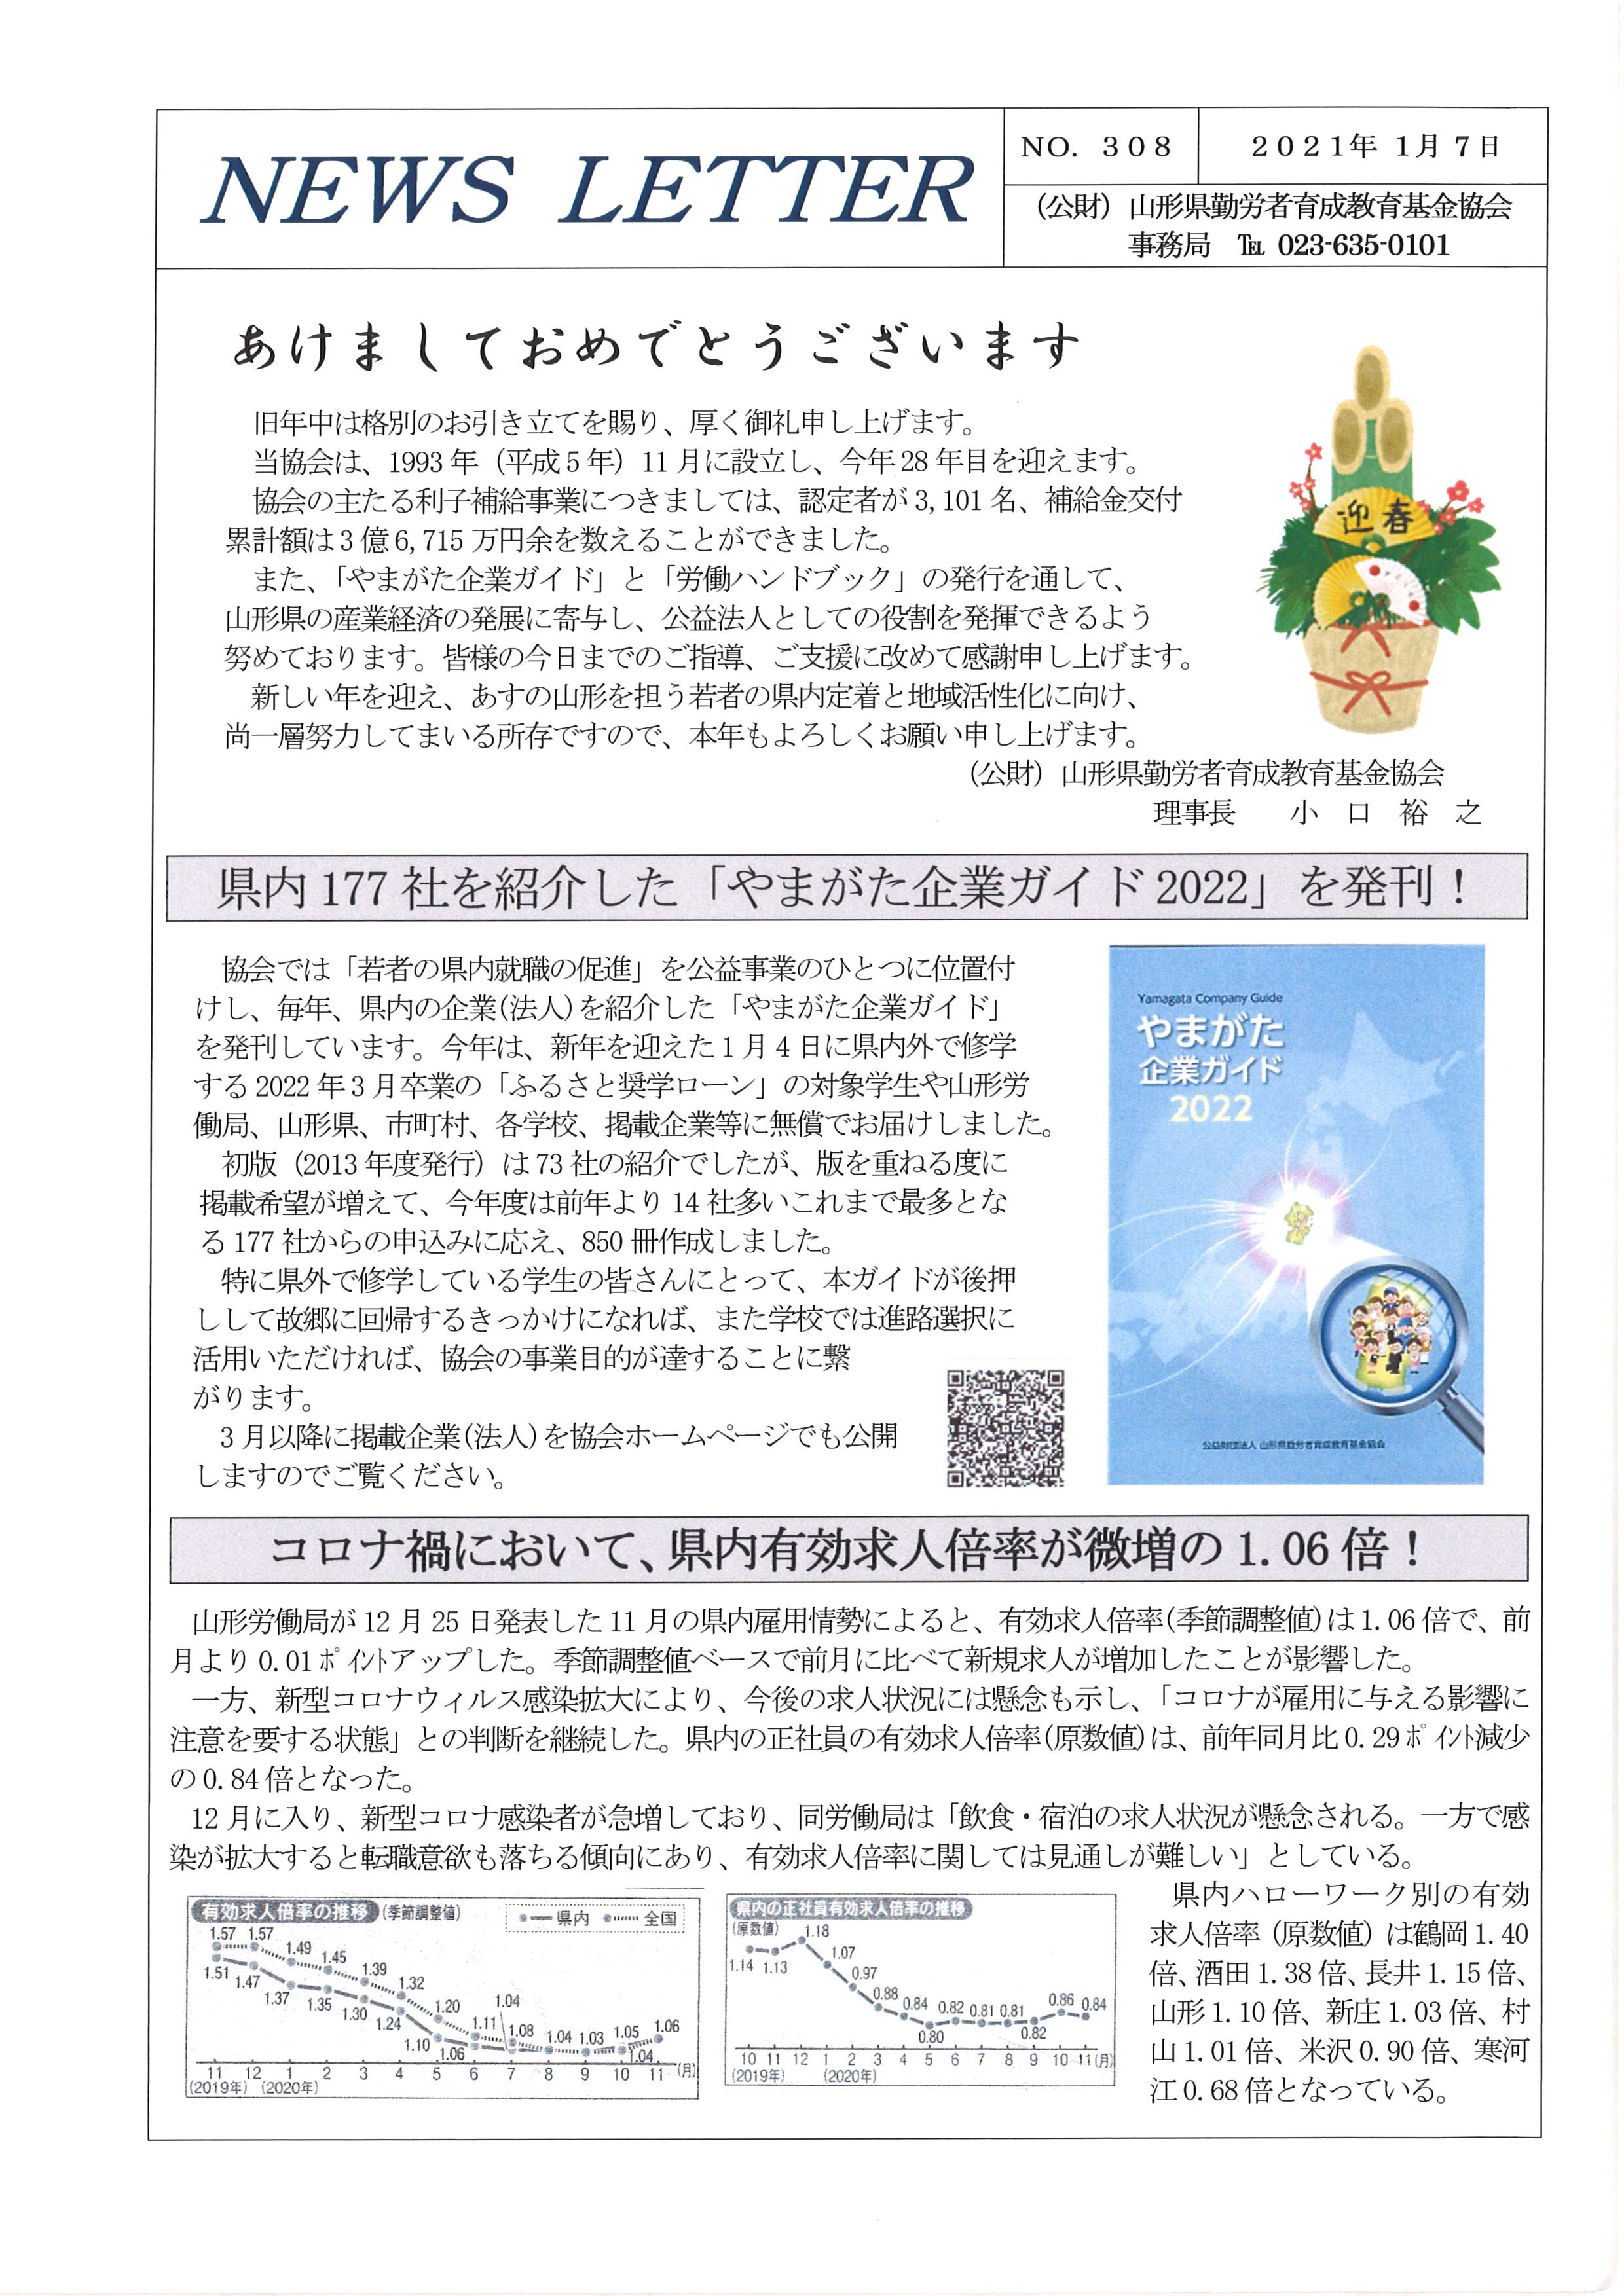 NEWS LETTER No.308　を発行しました